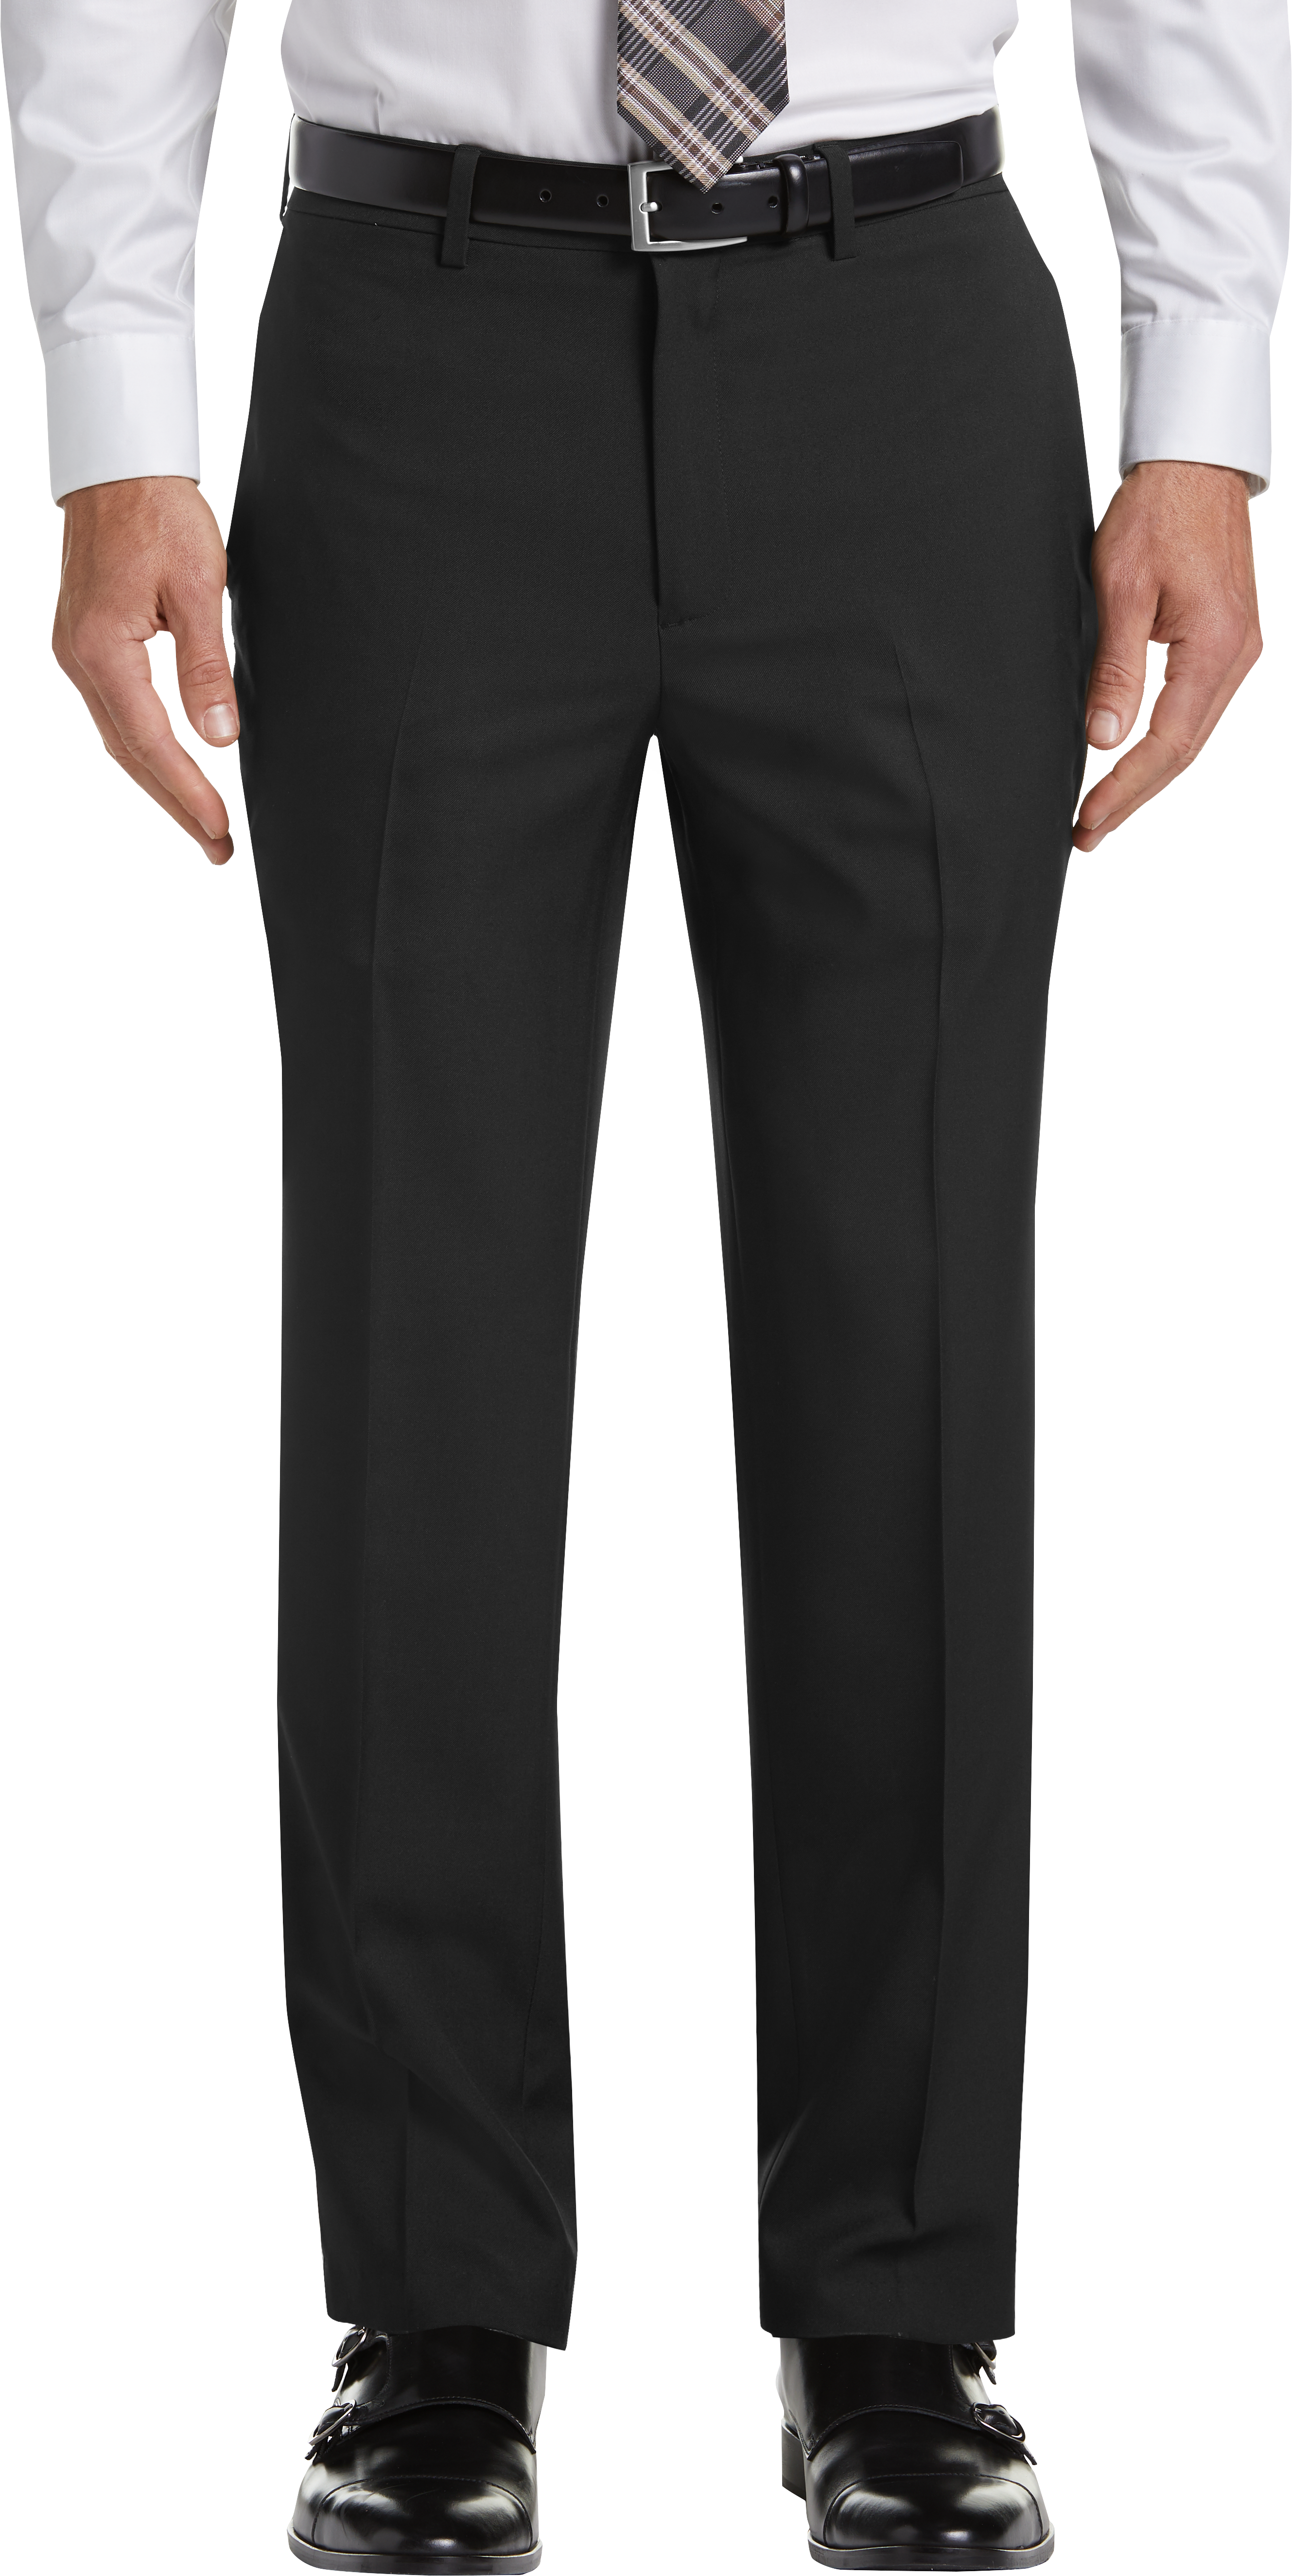 J.M Haggar® Mens 4 Way Stretch Straight Fit Flat Front Dress Pant, Color:  Black - JCPenney